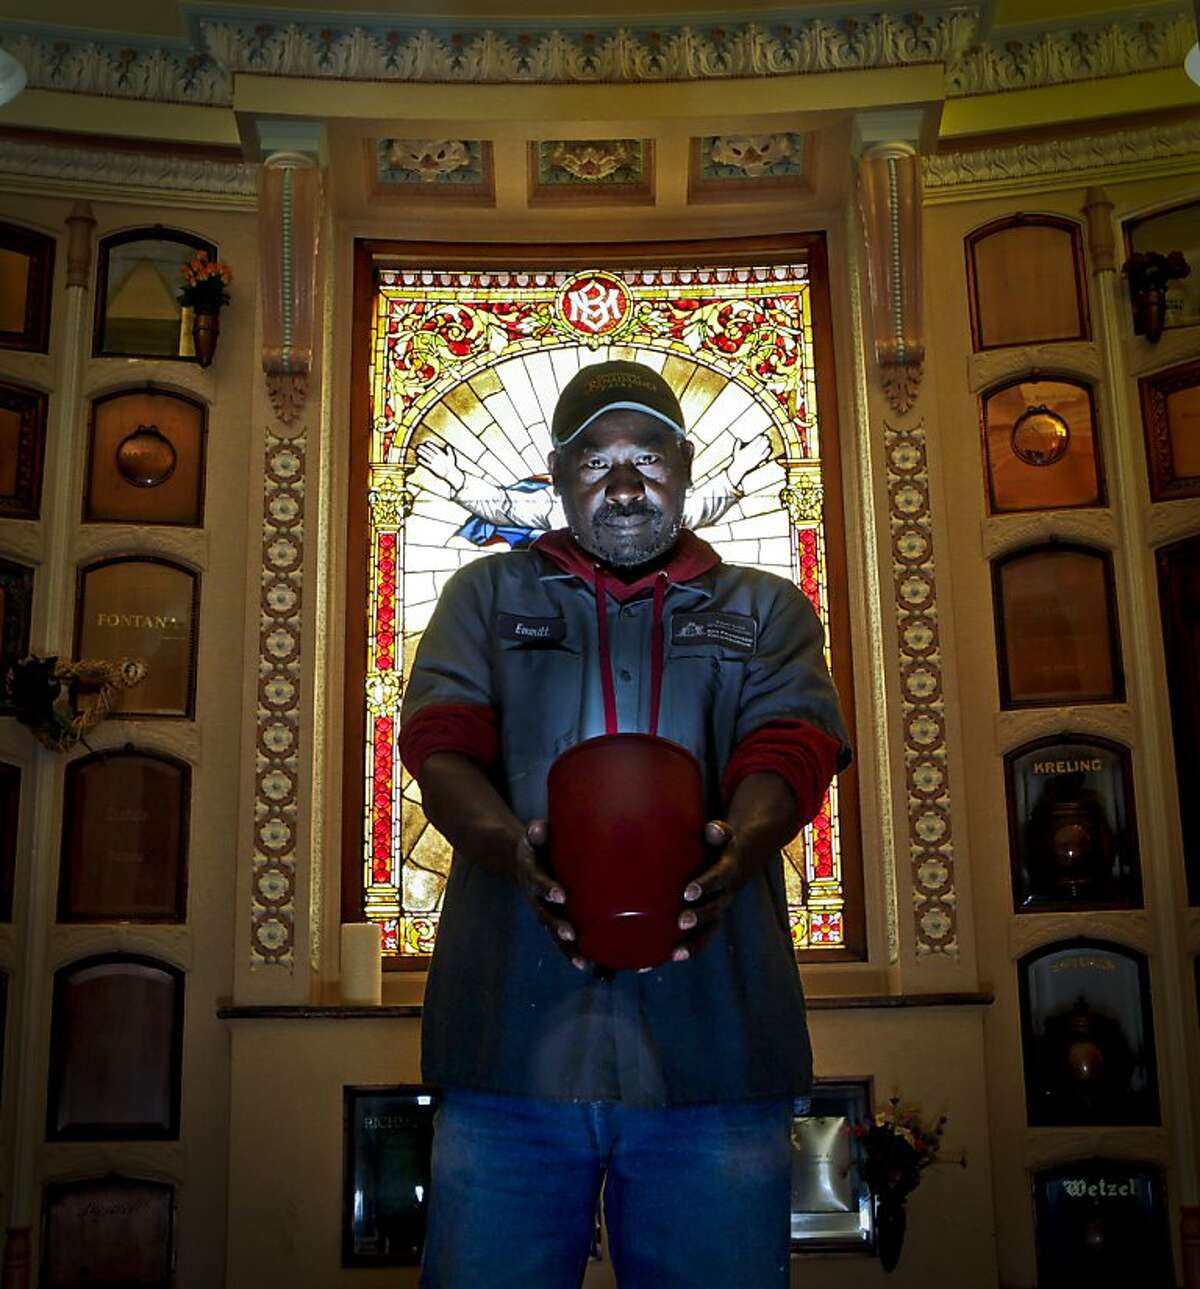 Emmitt Watson, seen on Wednesday, March 16, 2011 in San Francisco, Calif., is the caretaker and historian at the Columbarium in the Richmond district.